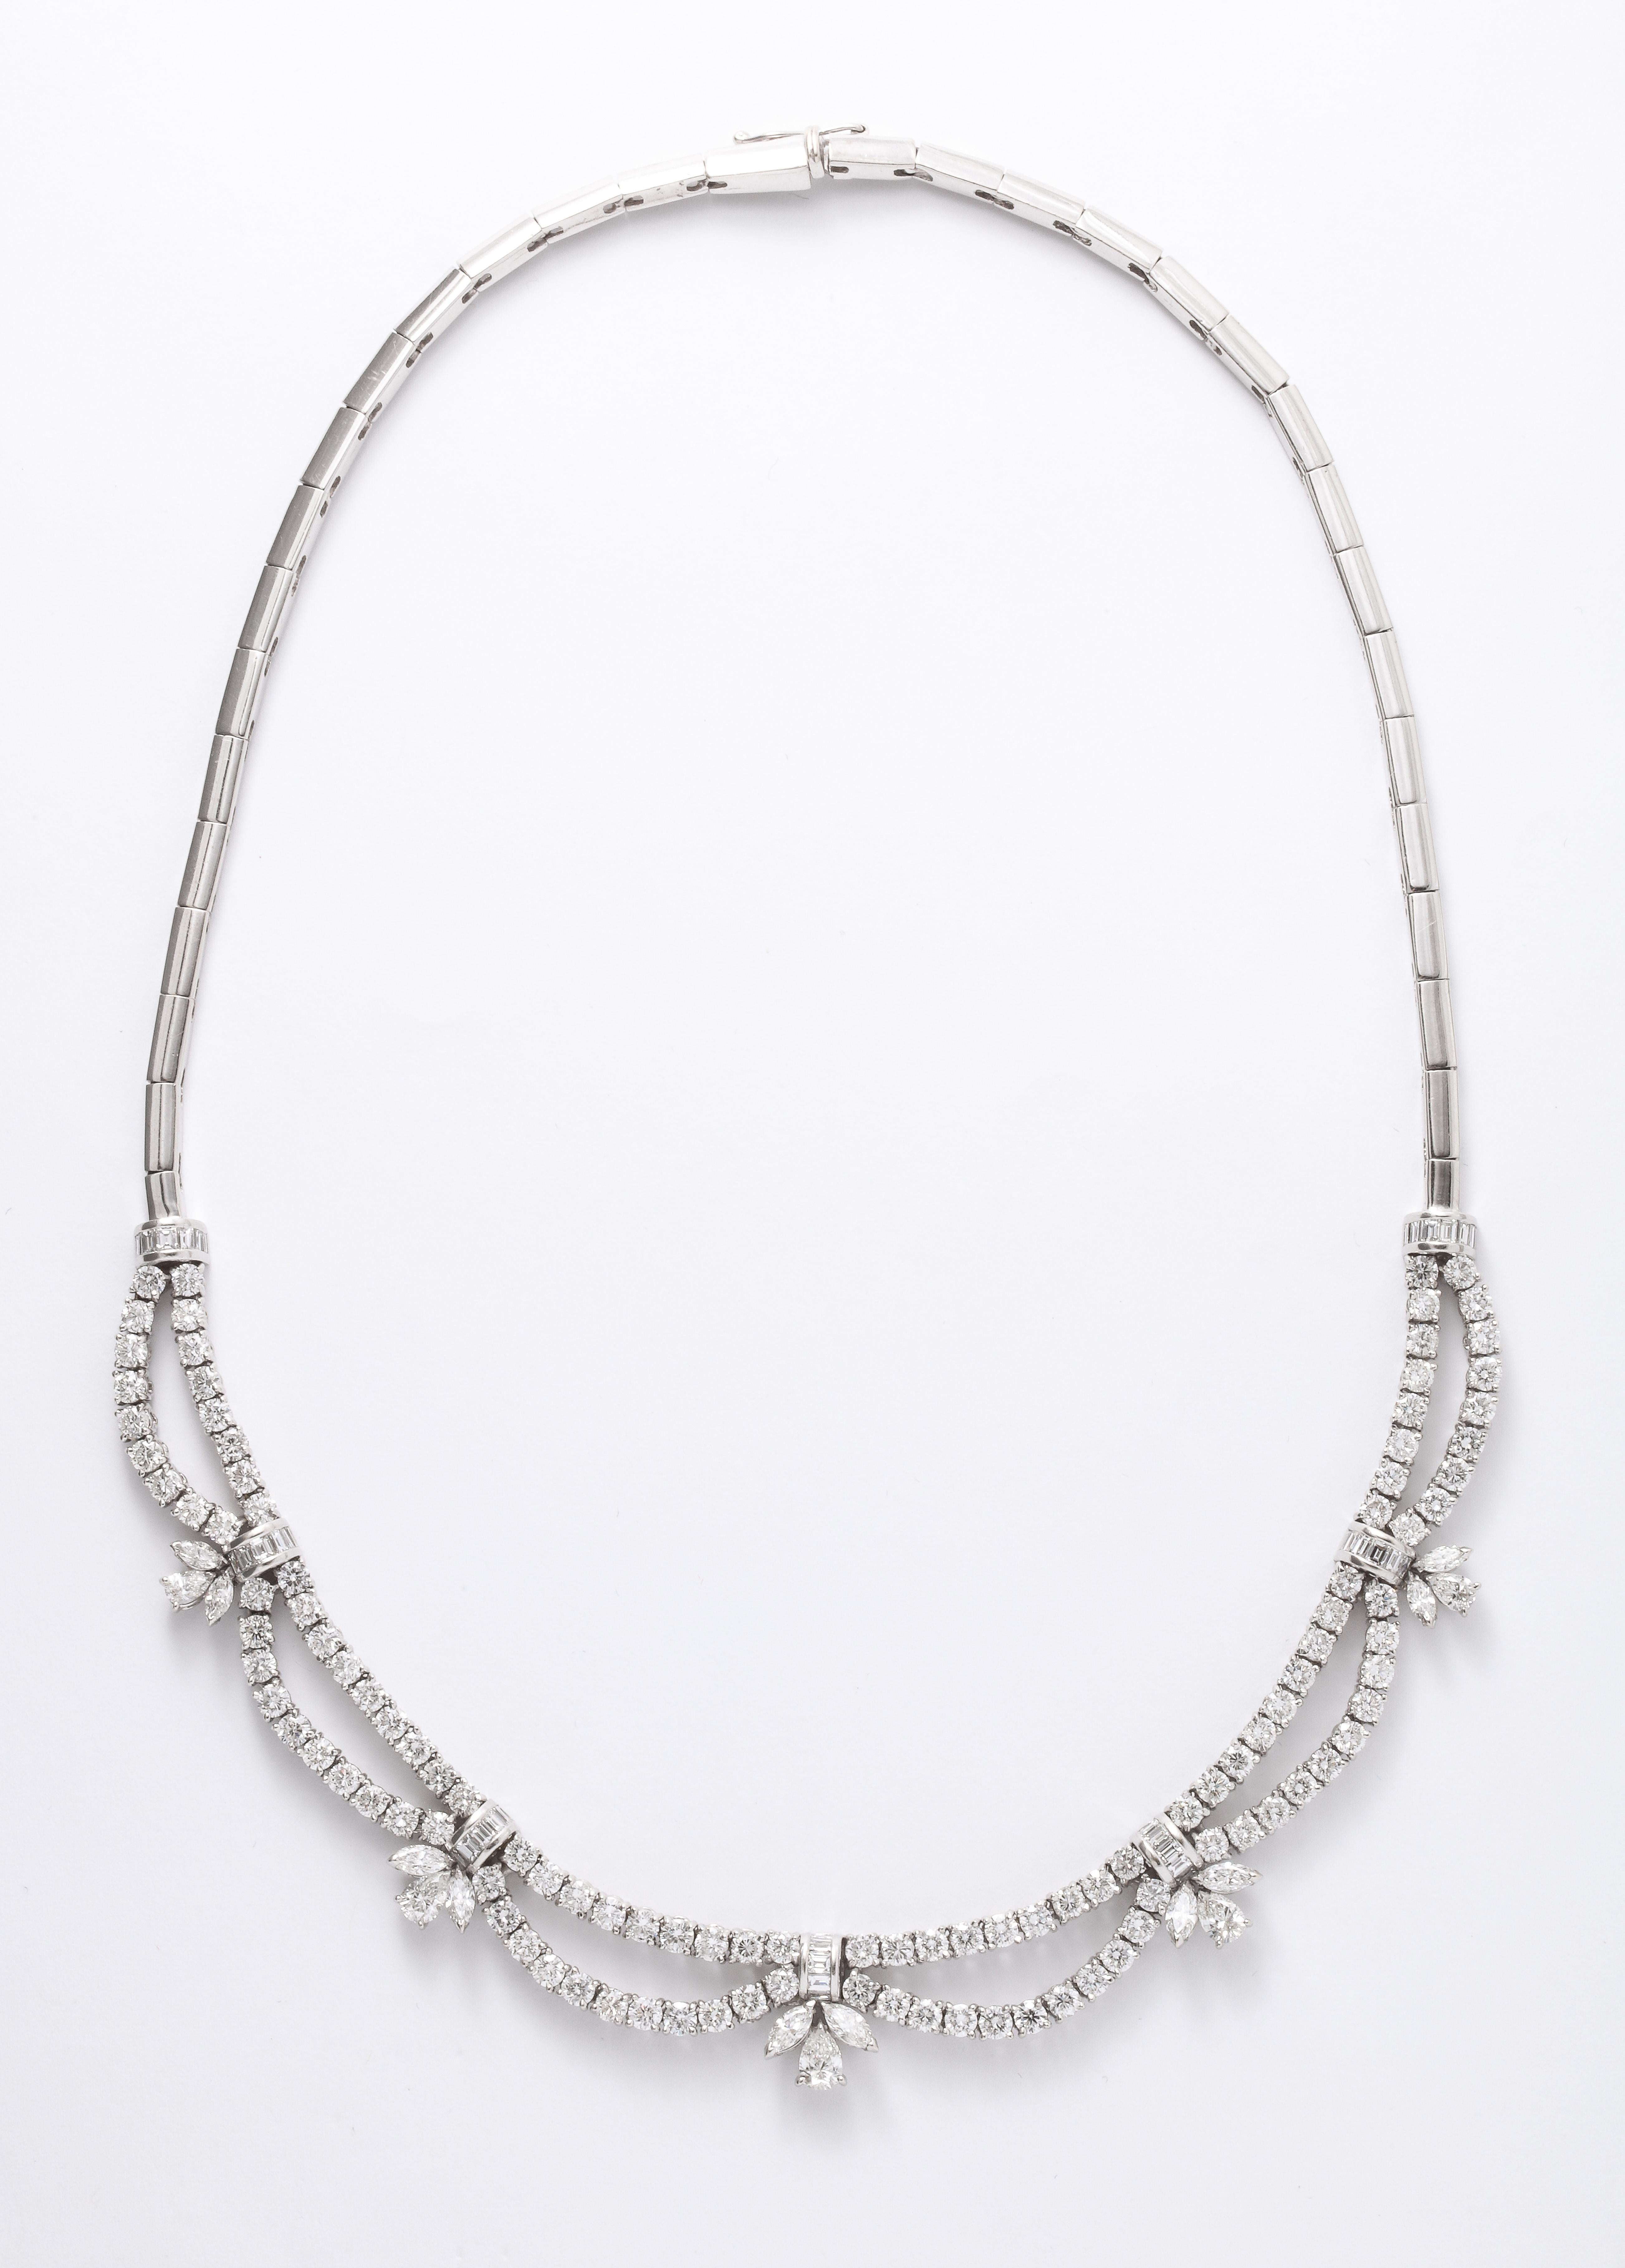 
A beautiful diamond necklace set in a scalloped design featuring round, pear, marquise and baguette cut diamonds. 

17.65 carats of white diamonds set in 18k white gold. 

16.5 inch length 

Designed and made in Italy
